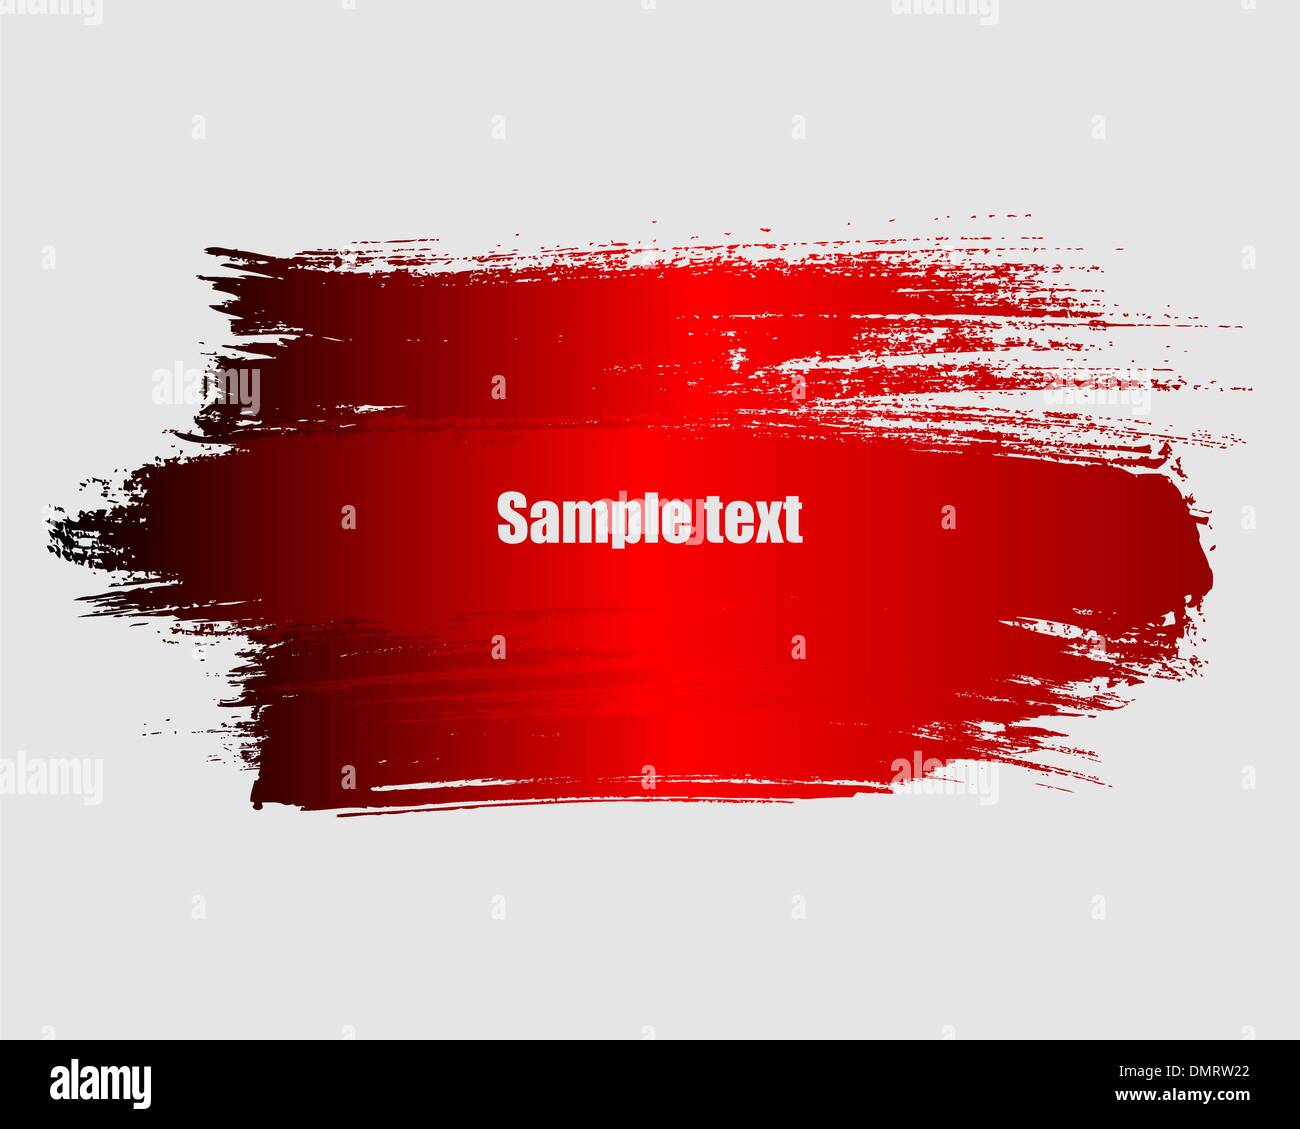 Paint grunge background Stock Vector